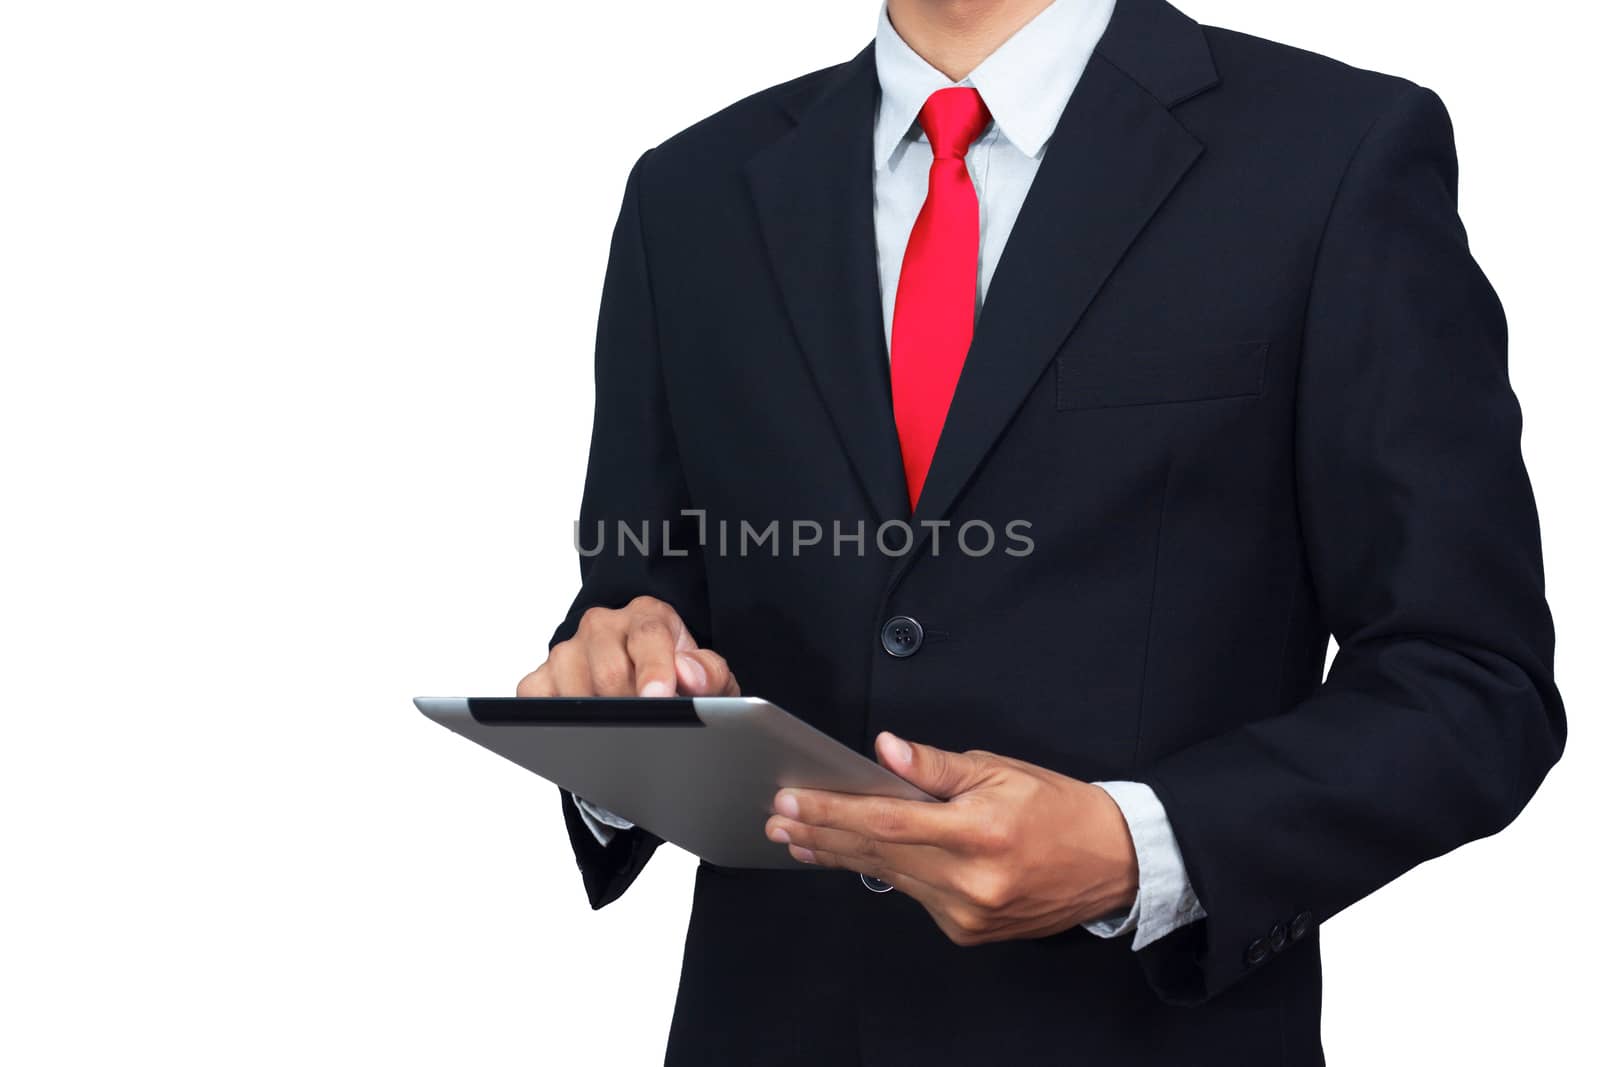 tablet technology for business concept. businessman using tablet, clipping path include